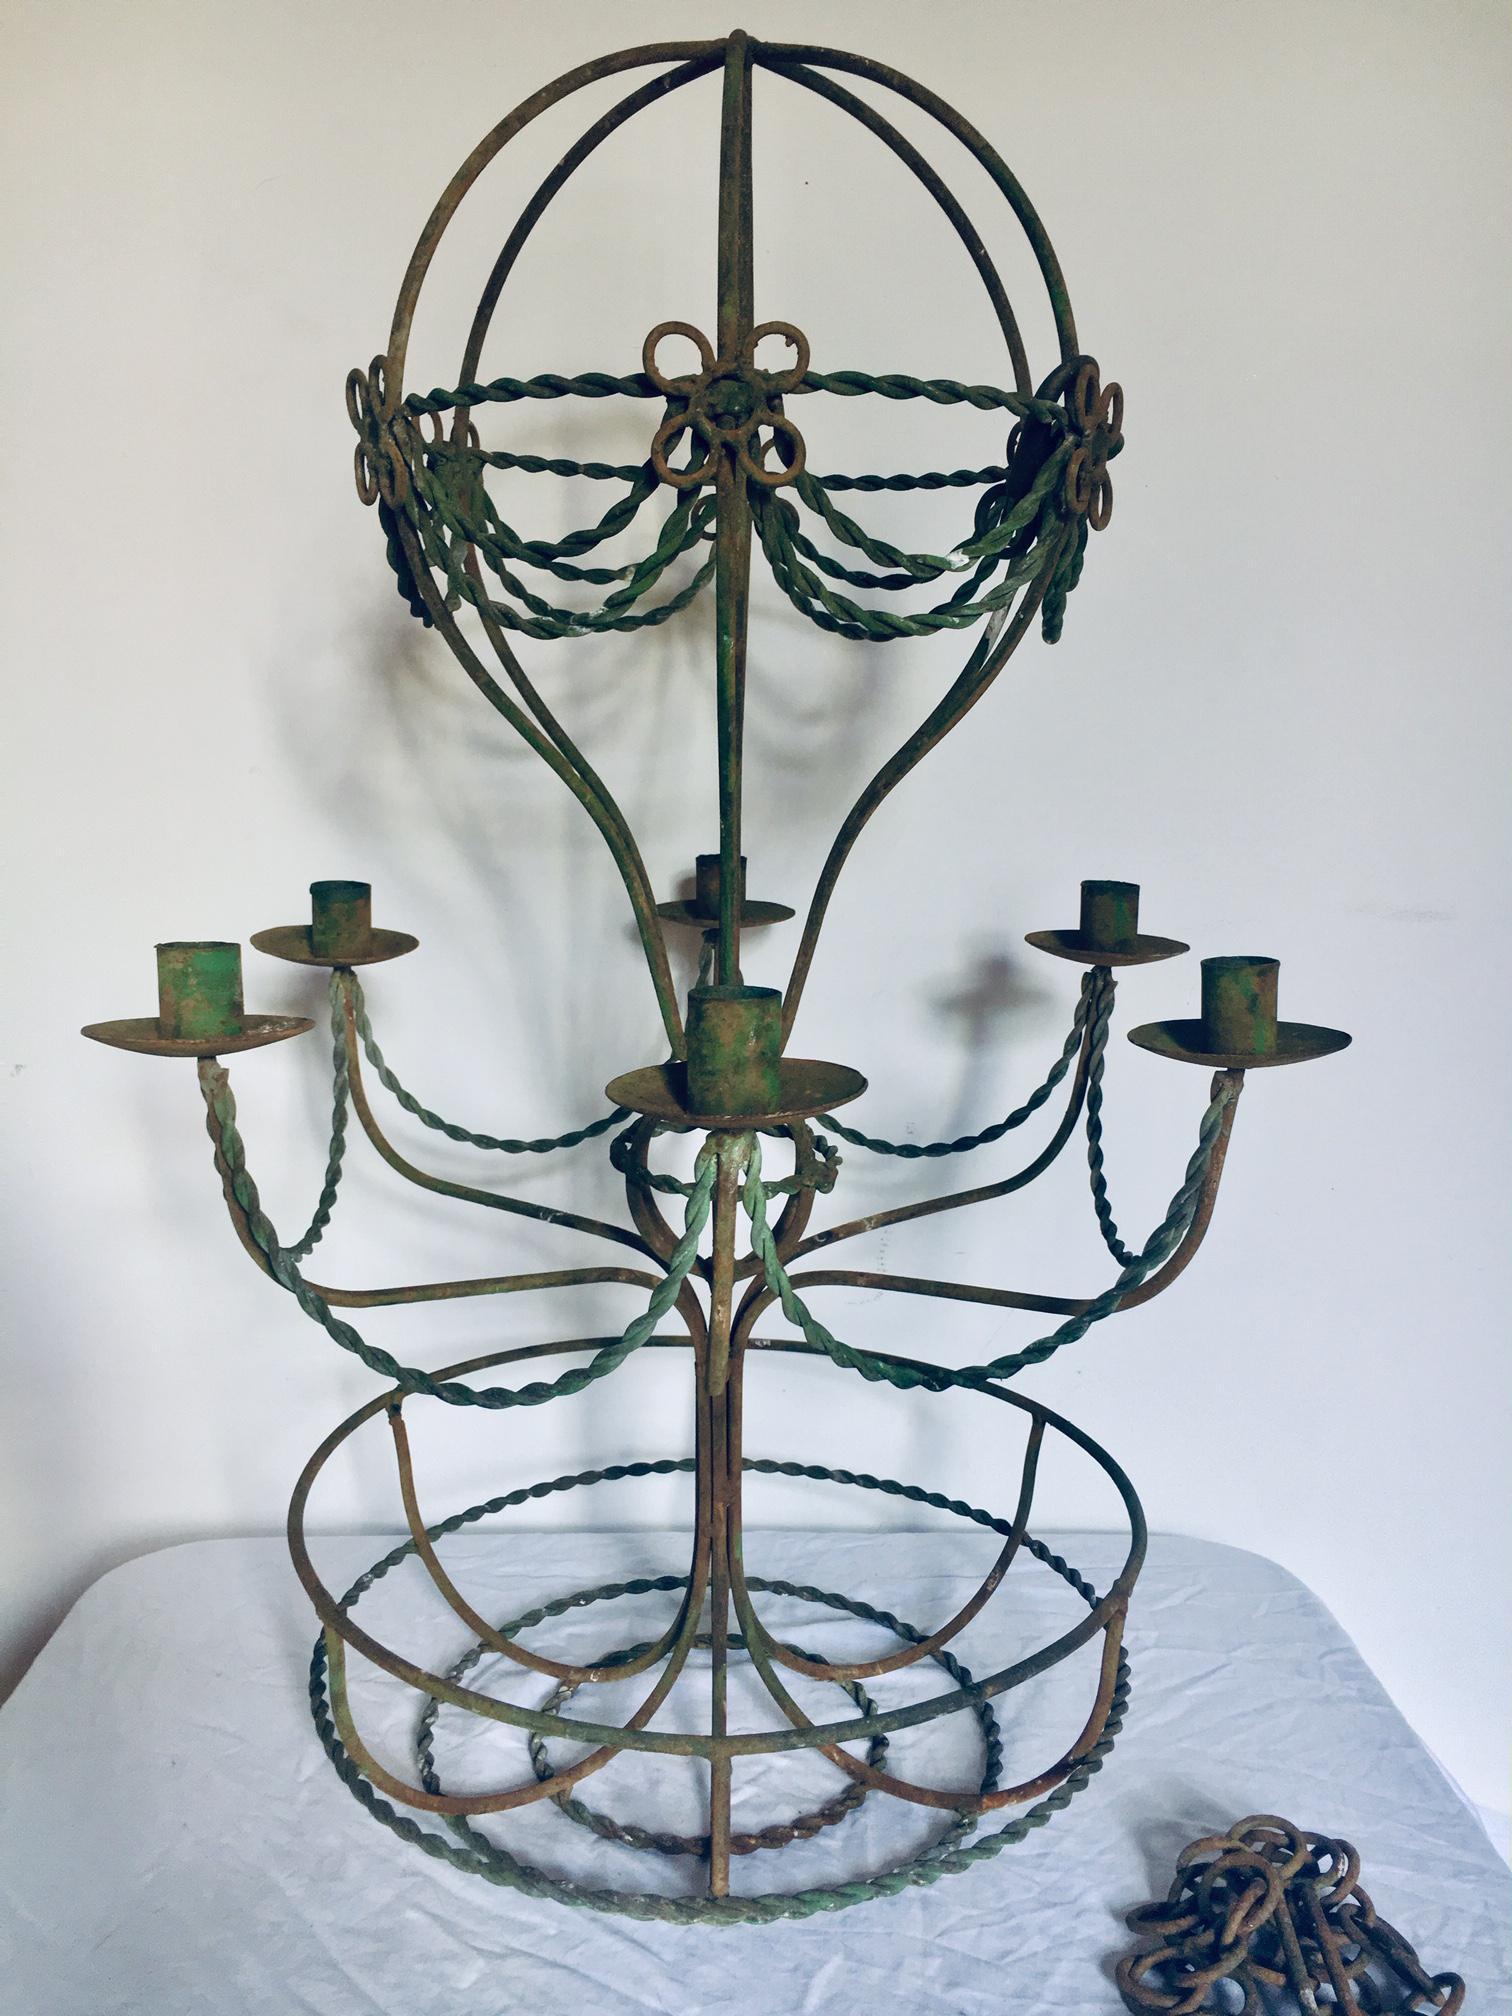 French 1940's Hollywood Regency Verde/ Green Iron Hot Air Balloon Chandelier. Candle Light, not electrified. There is some age wear to the green finish. Gives the piece character and is not detracting.